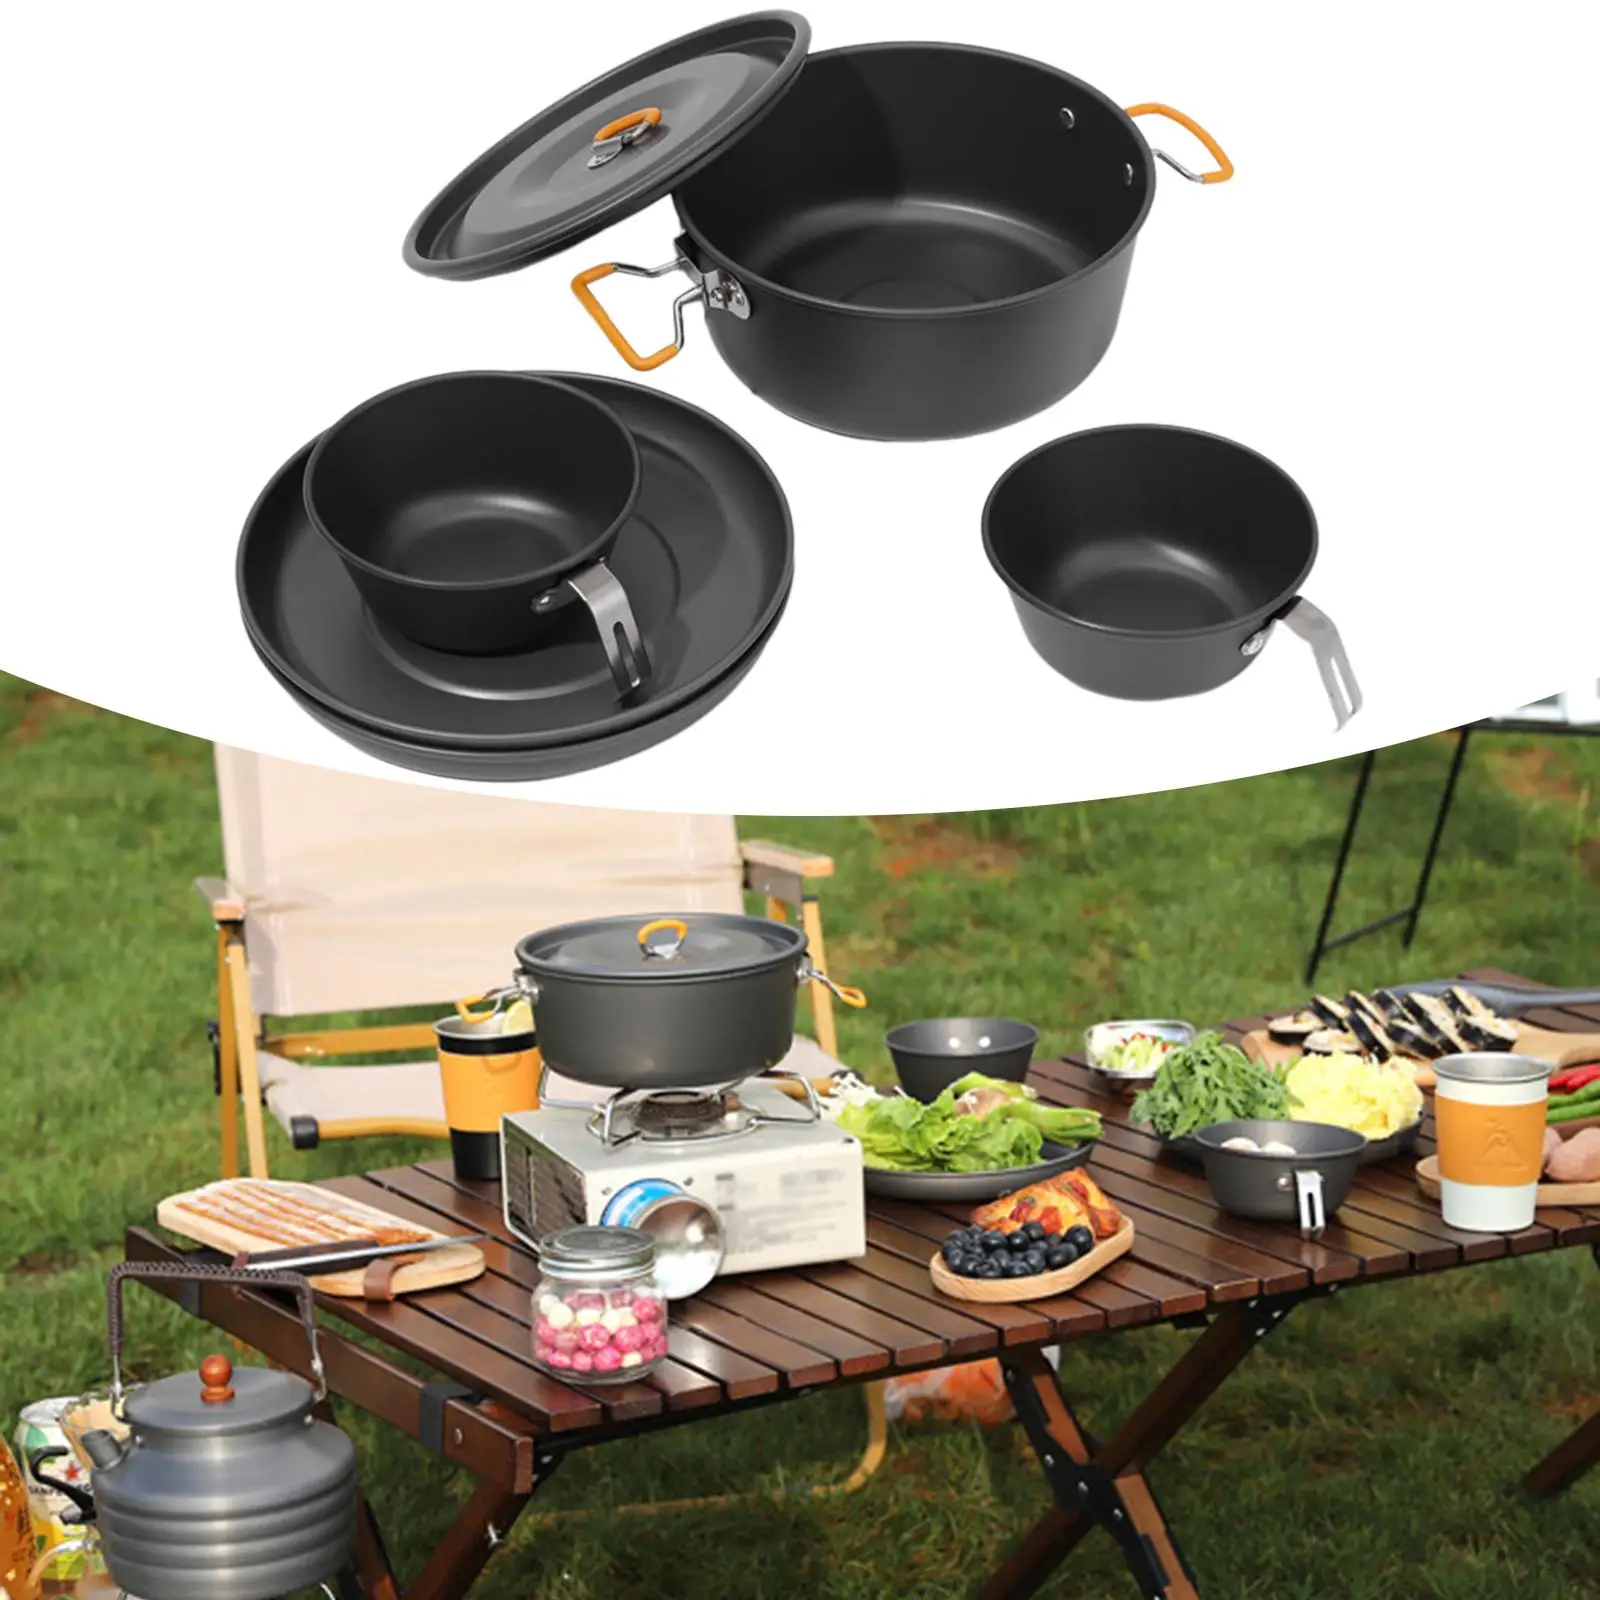 Camping Cookware Set Accessories Portable Cooking Cookware Outdoor Pot Tableware Kit for Hiking Outdoor Survival Dinner Travel